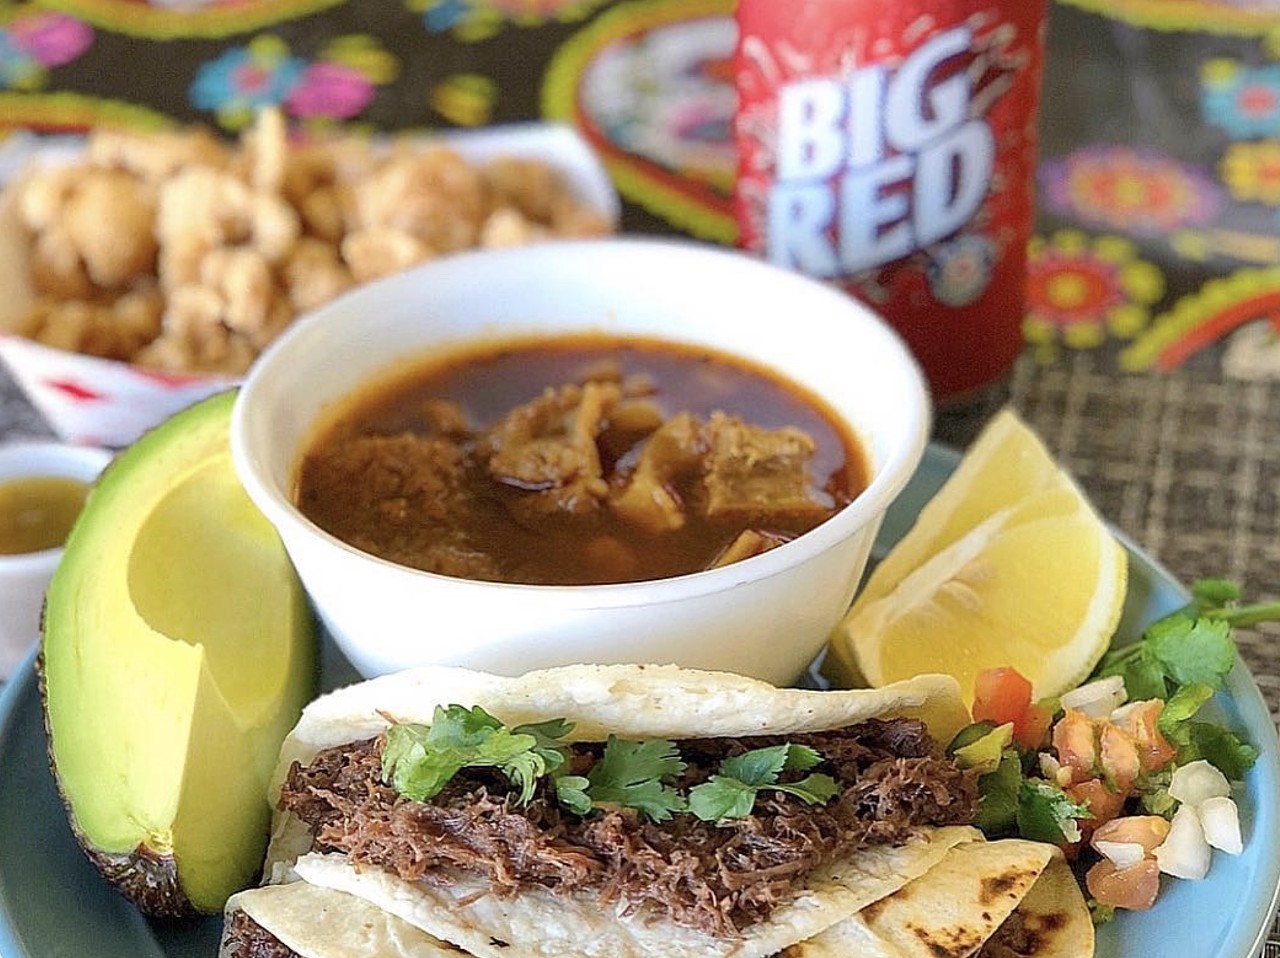 See what the fuss is about Big Red & Barbacoa
Ever wonder why San Antonio has an entire festival dedicated to this food combo? Drop in to your favorite taco spot and try it out for yourself.